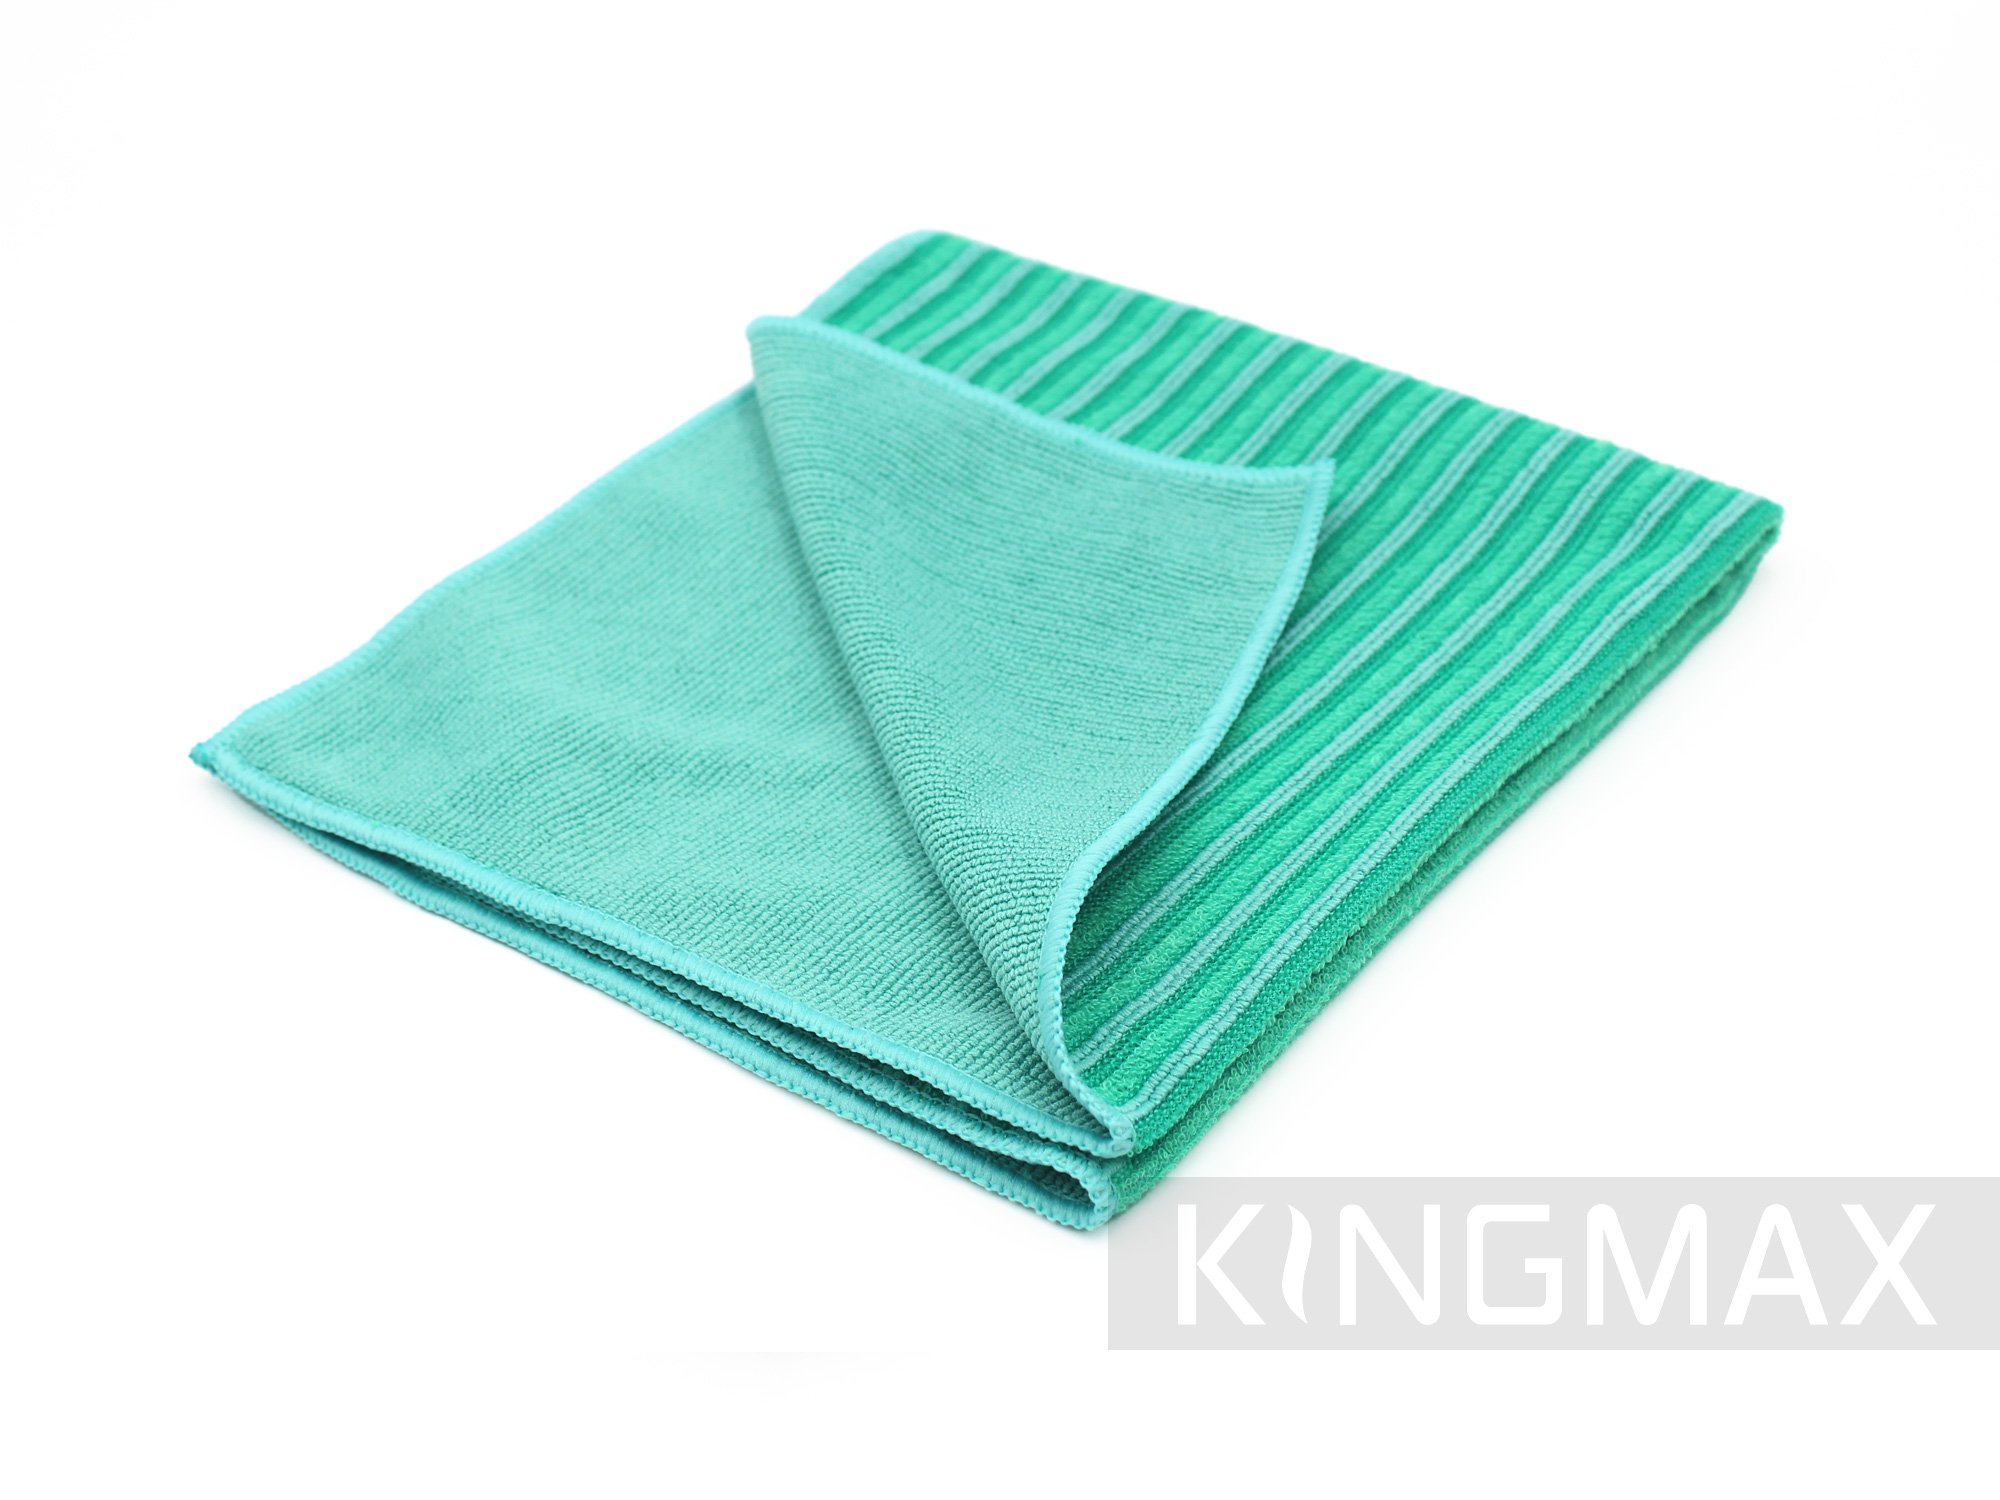 Superpol stripes towel, daily use towel 